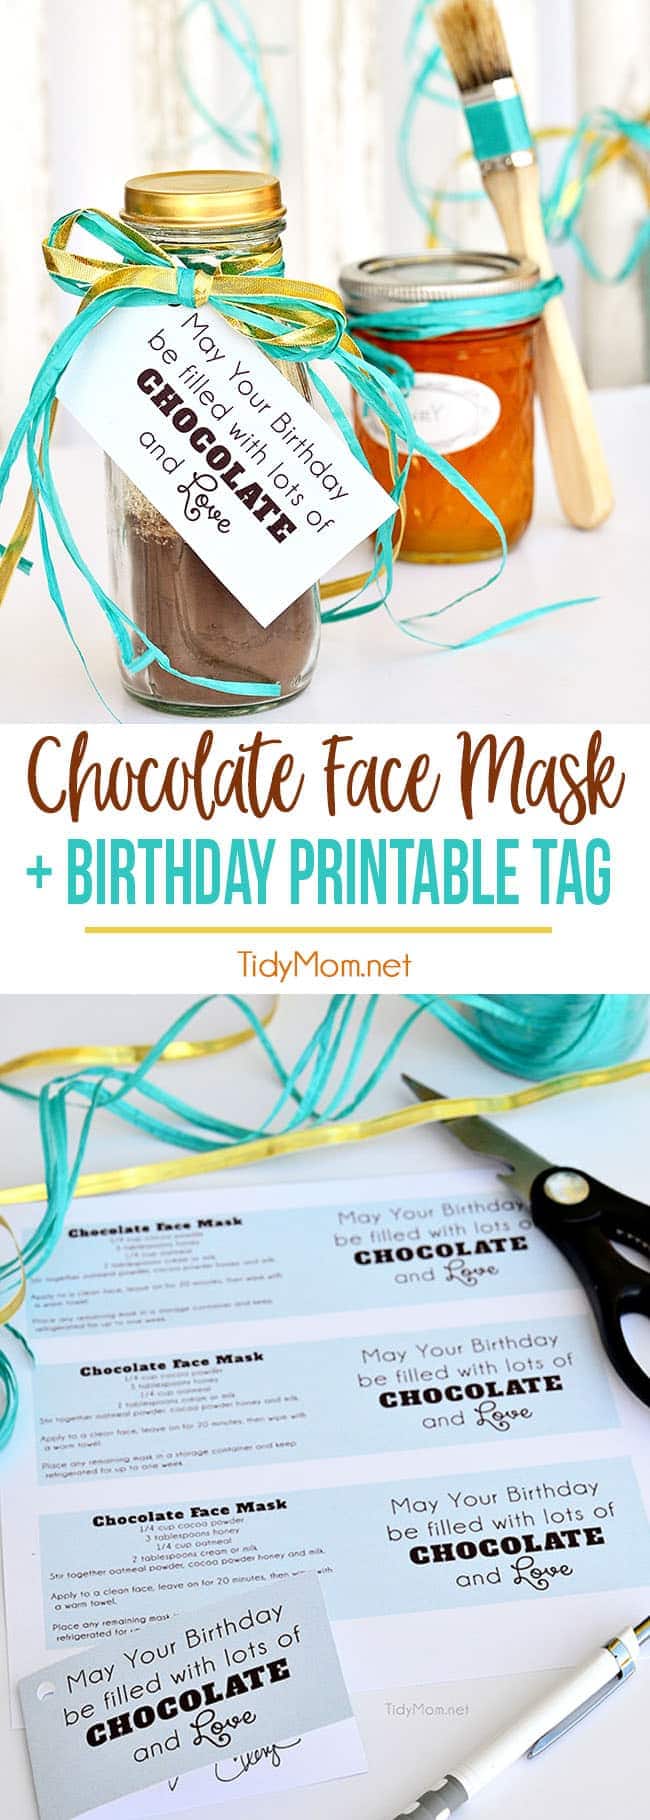 This decadent chocolate facial recipe is ideal for most skin types. Filled with antioxidants that rejuvenate the skin, and will leave your face smooth, soft, and glowing. All Natural Chocolate Face Mask makes a wonderful gift!! Get the recipe and free printable birthday tags at TidyMom.net